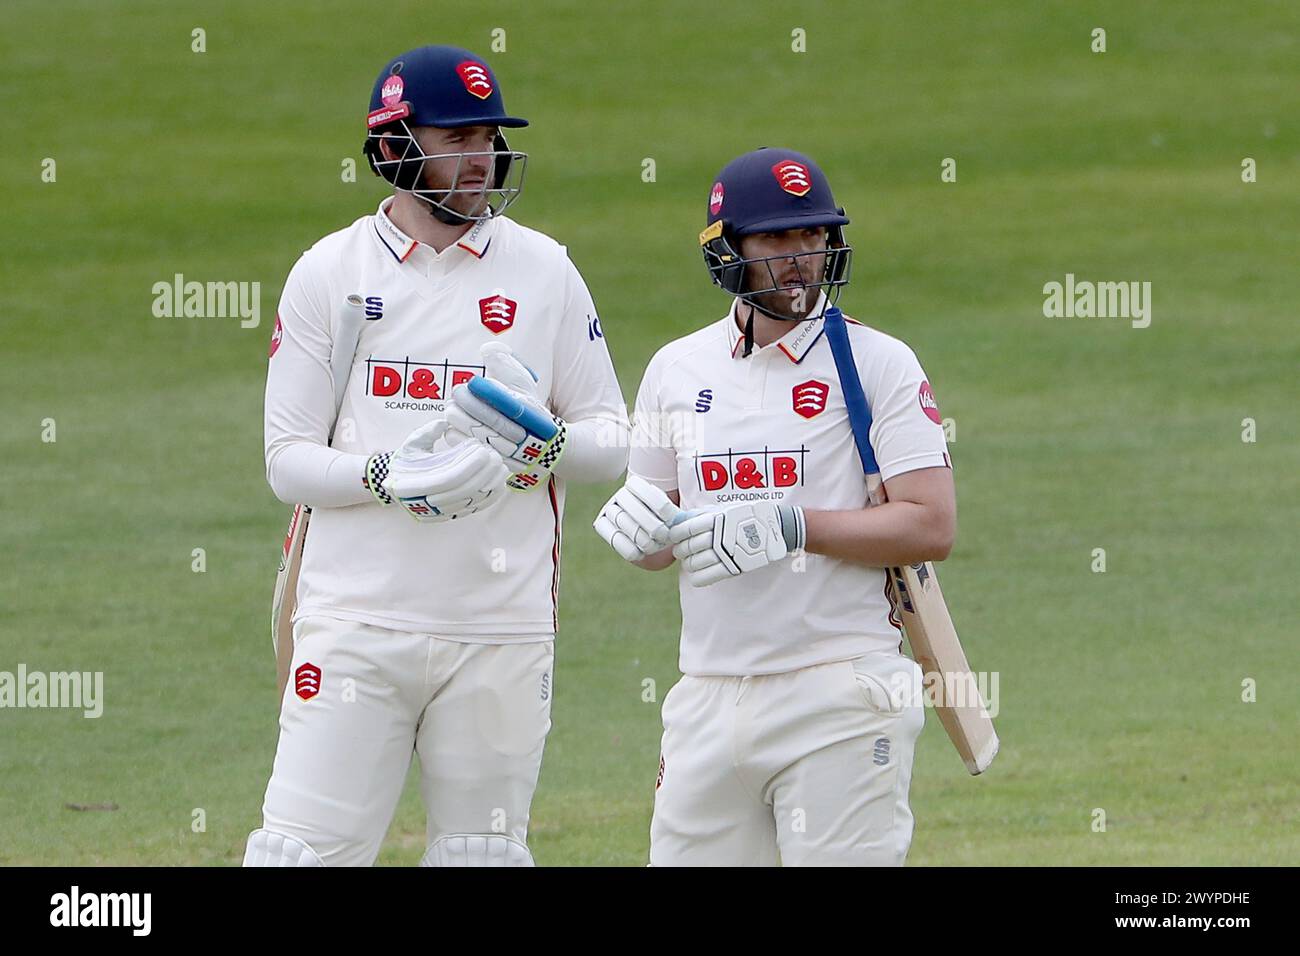 Paul Walter (L) and Matt Critchley of Essex during Nottinghamshire CCC vs Essex CCC, Vitality County Championship Division 1 Cricket at Trent Bridge o Stock Photo